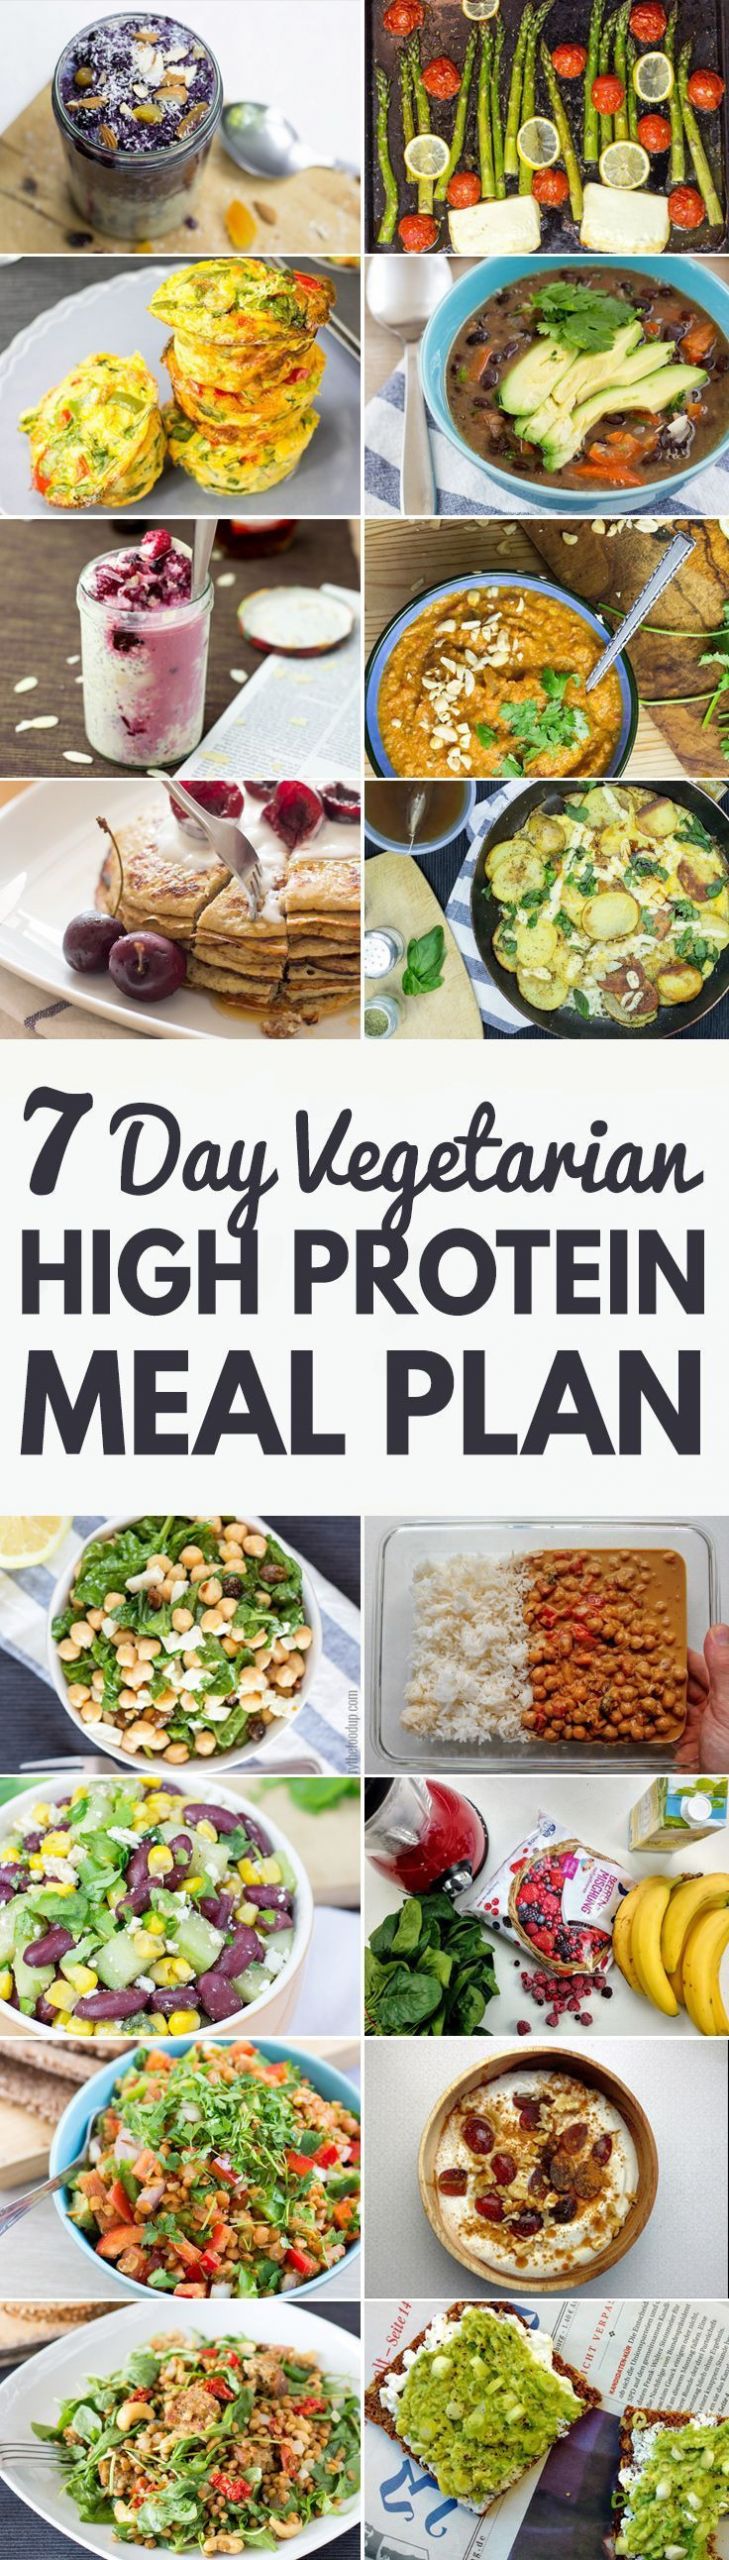 Vegan Protein Meal Plan
 High Protein Ve arian Meal Plan – Build Muscle and Tone